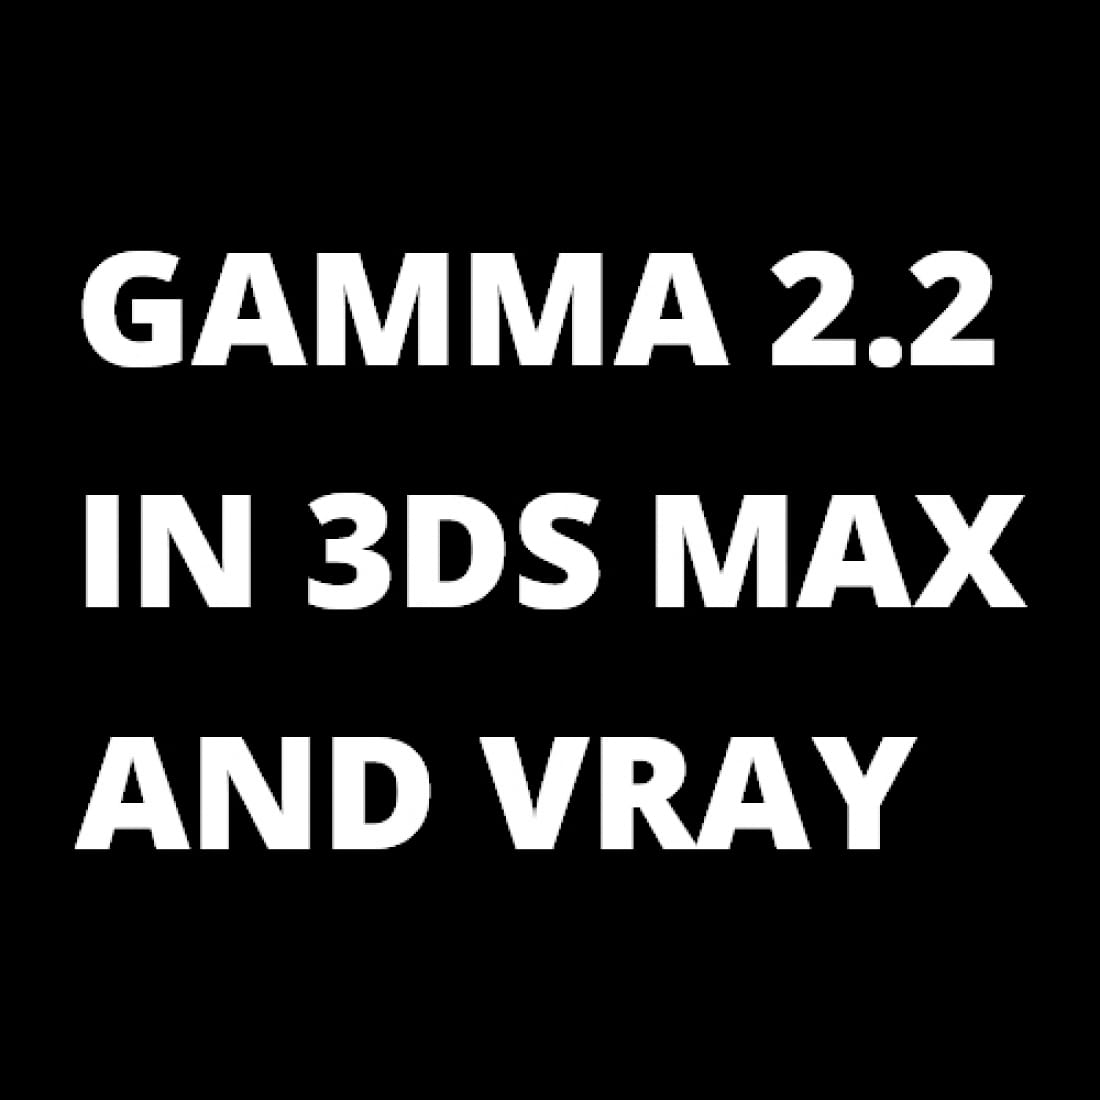 gamma-2-2-in-3ds-max-and-vray-video-